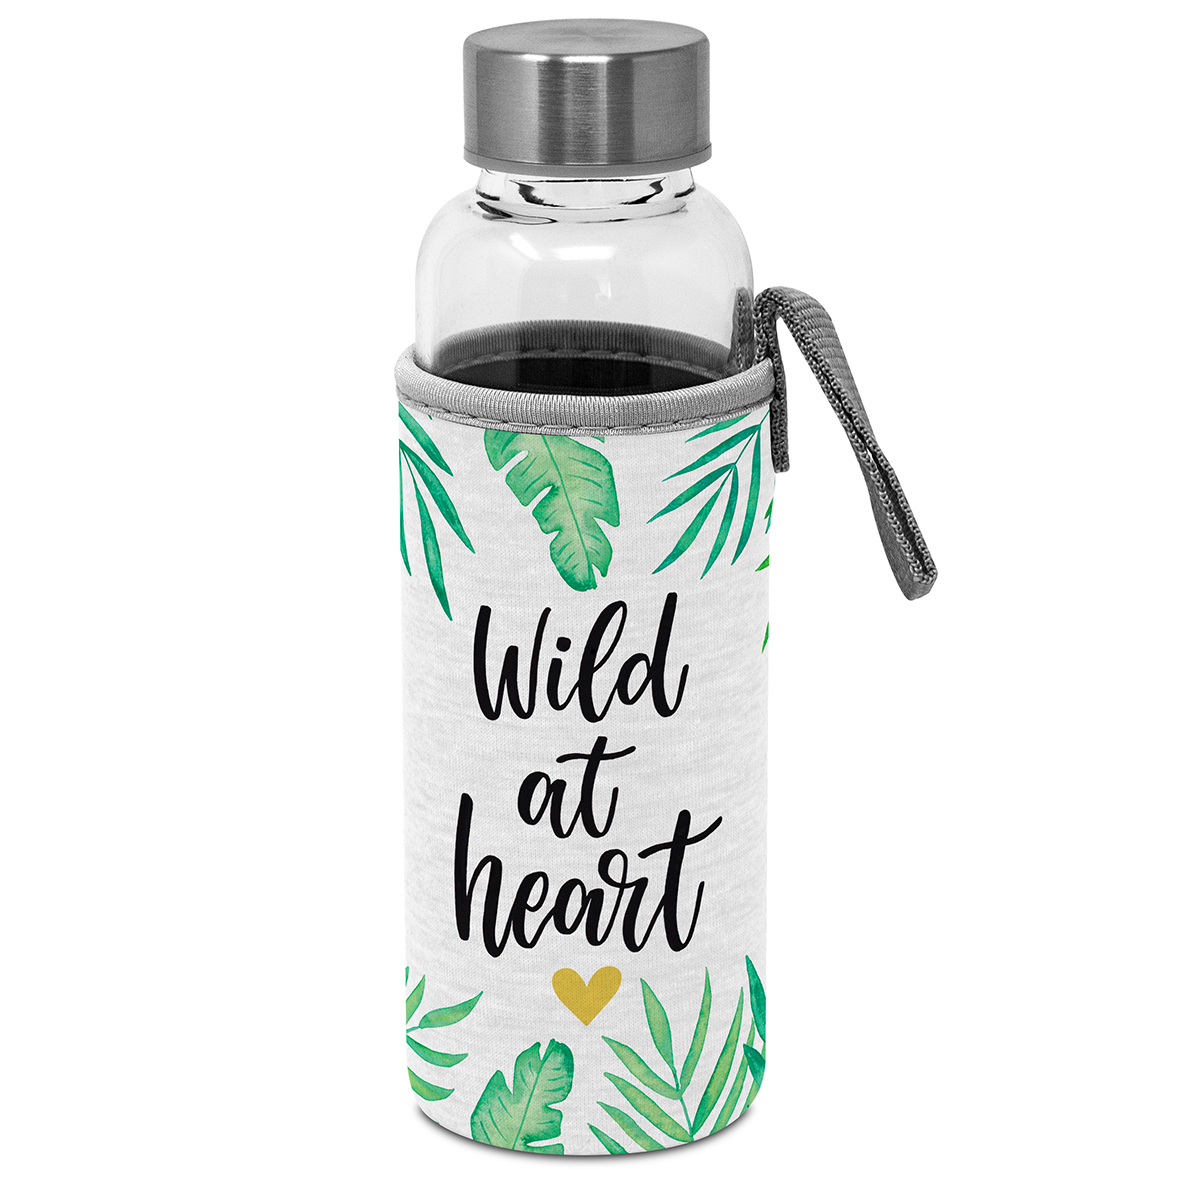 Glass Bottle with protection sleeve Wild at heart